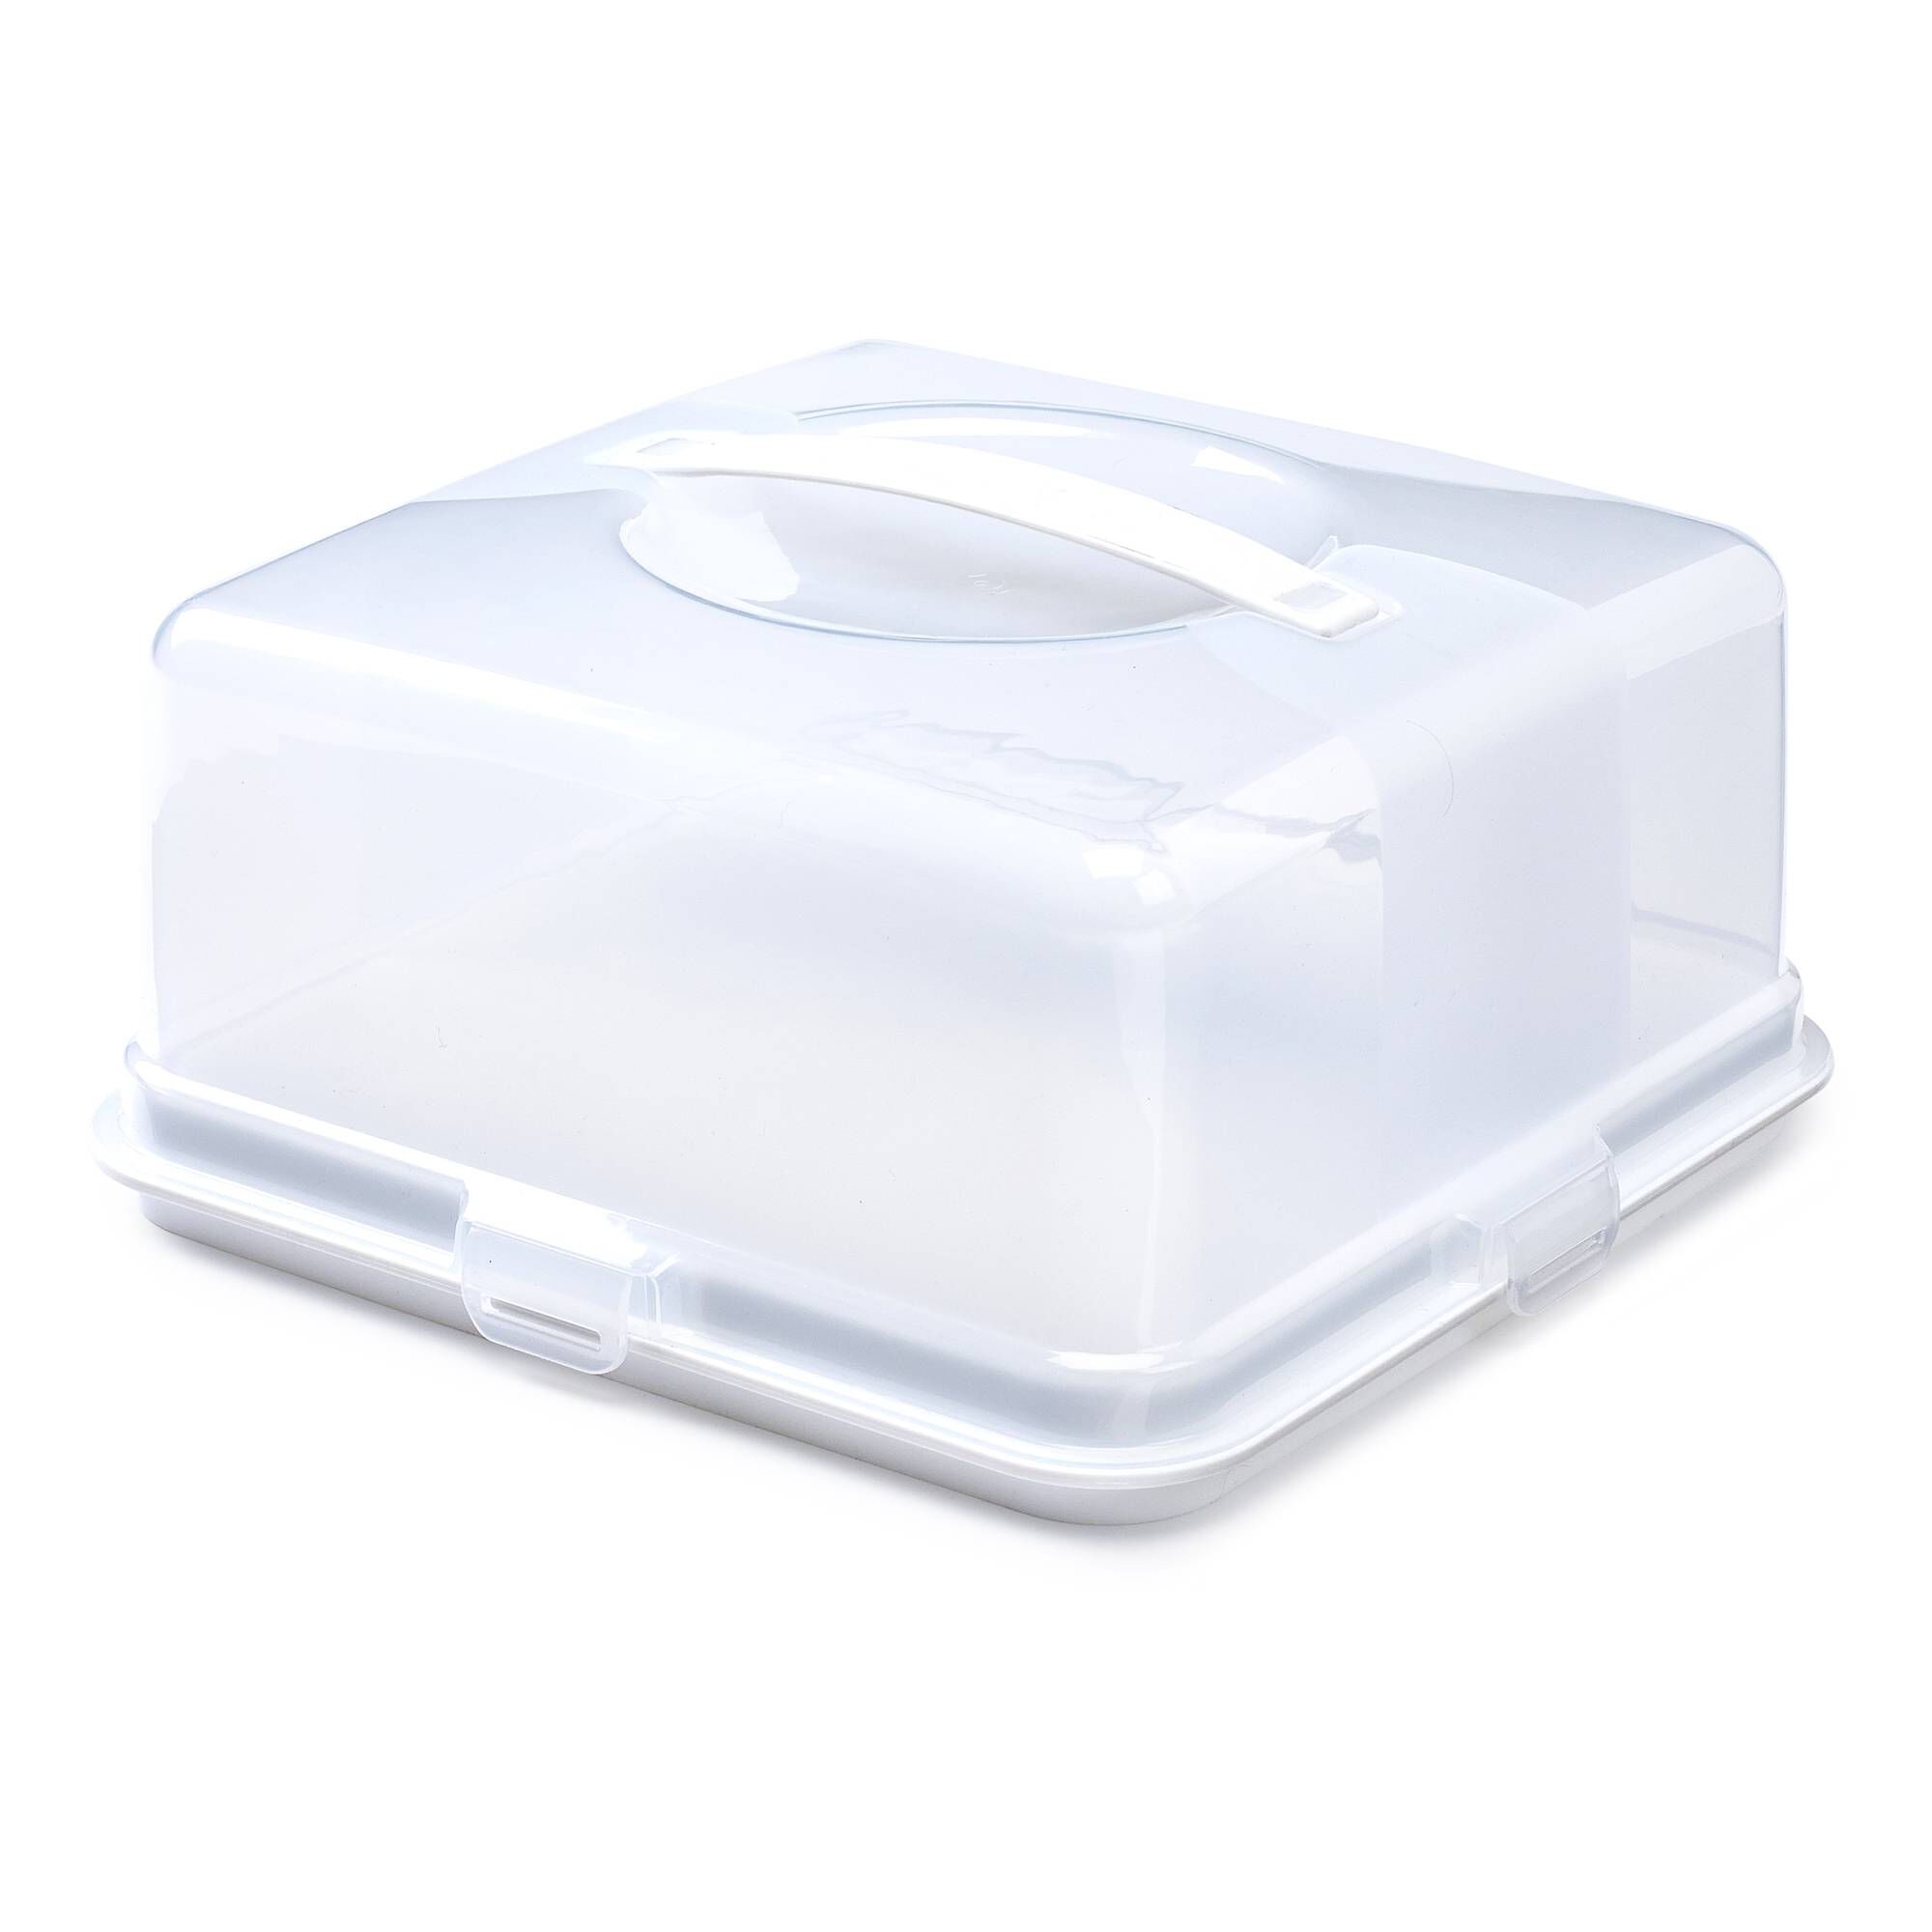 Cake Containers and Bakery Packaging || GM Packaging – GM Packaging (UK) Ltd